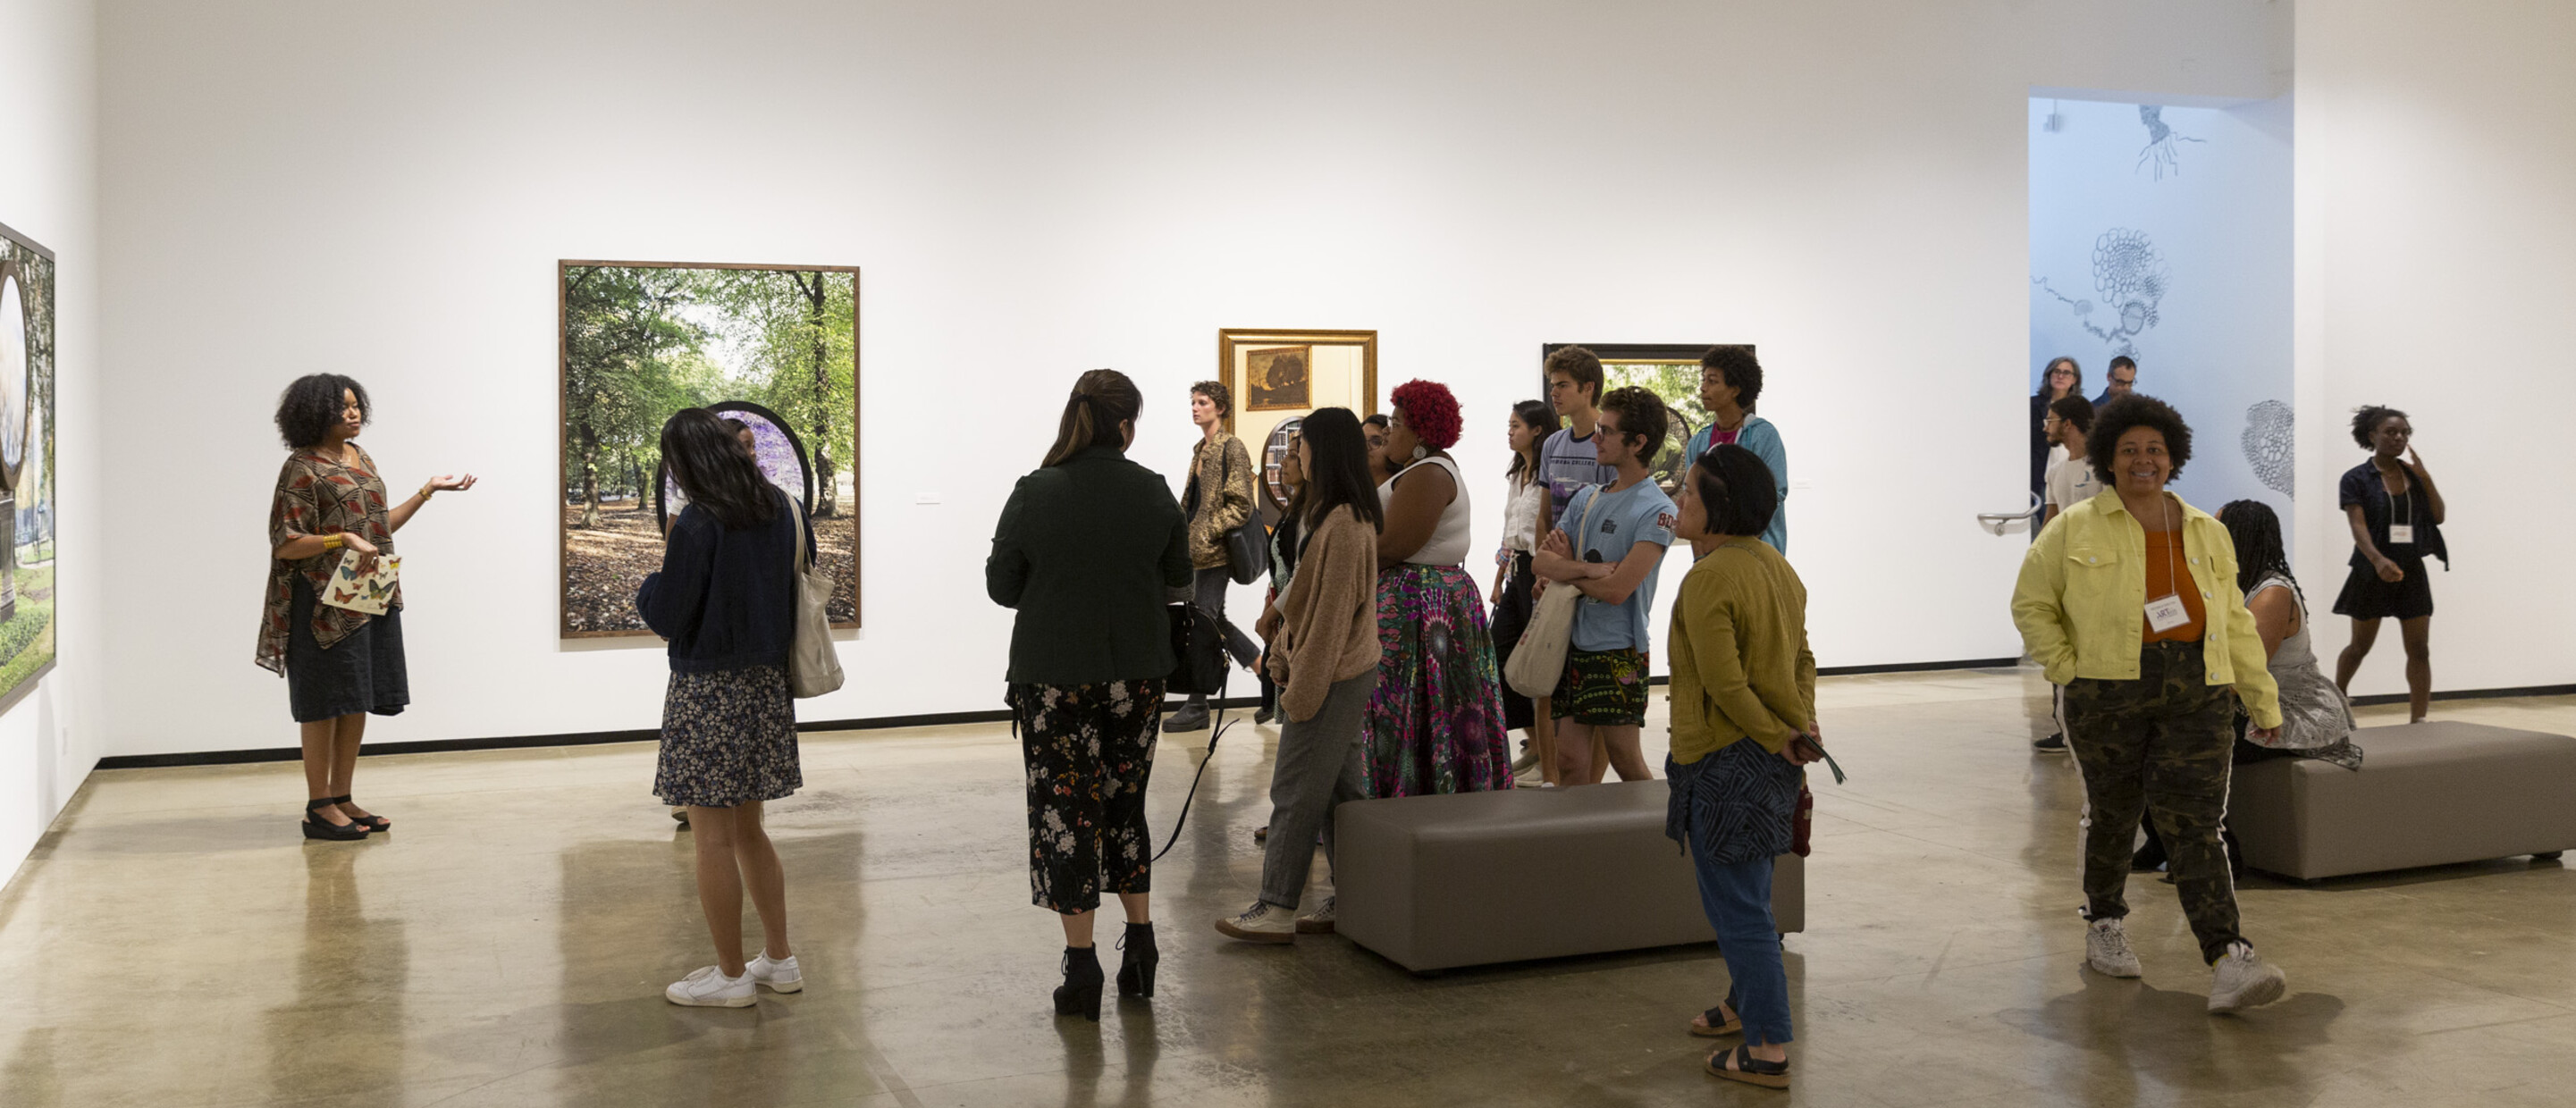 Group of people inside a gallery following an exhibition tour